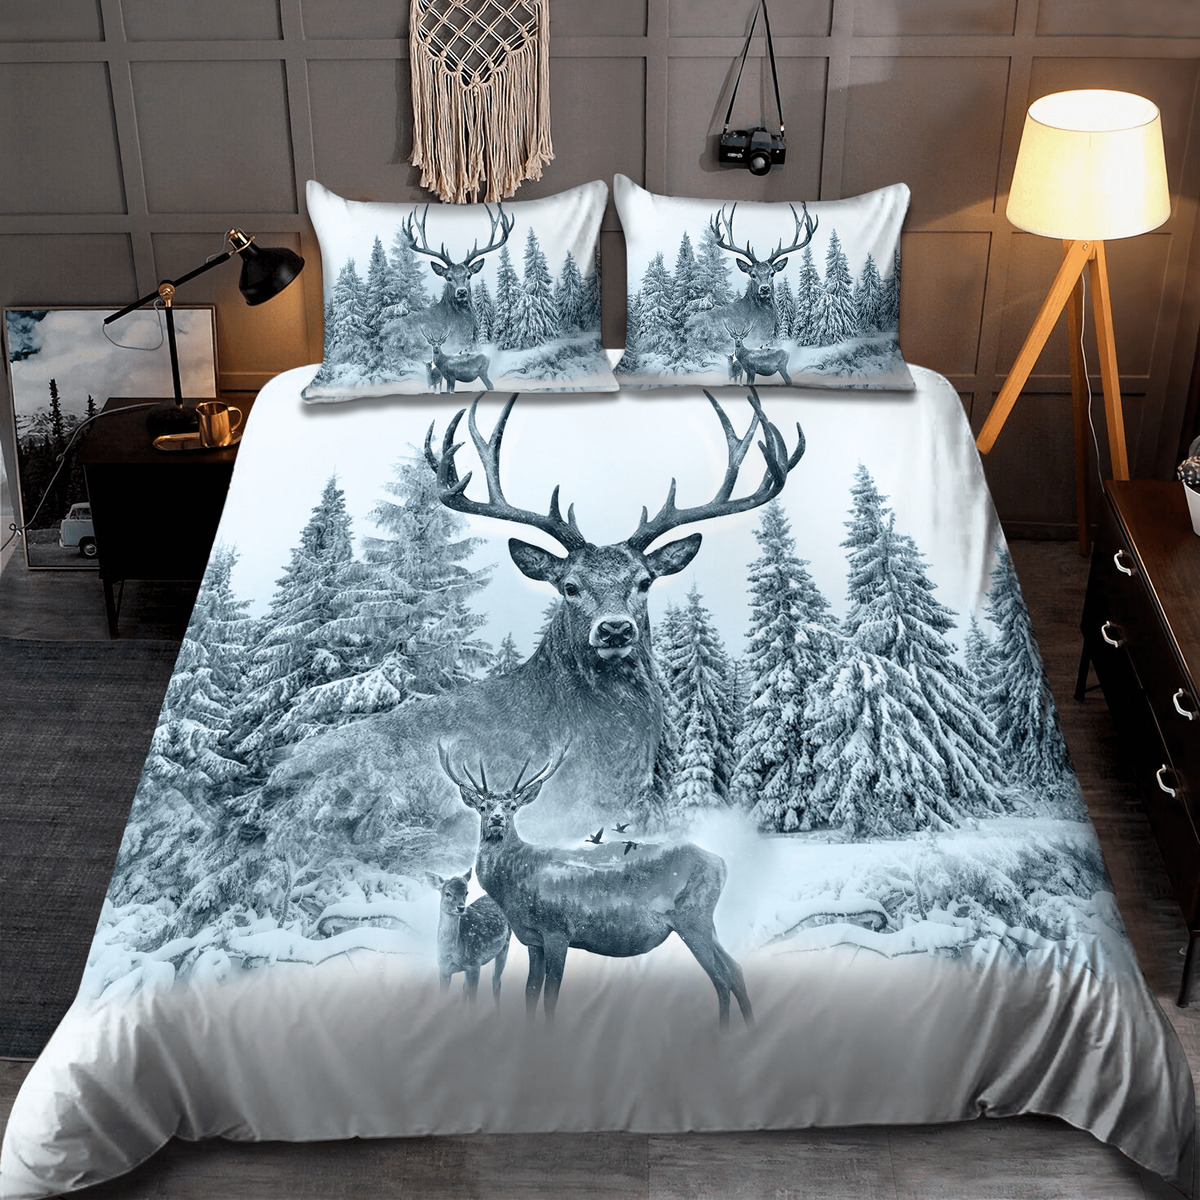 Snow Deer Hunting White Quilt Bedding Set - White Deer In Forest Quilt Bed Set Full Size With 2 Pillowcases.